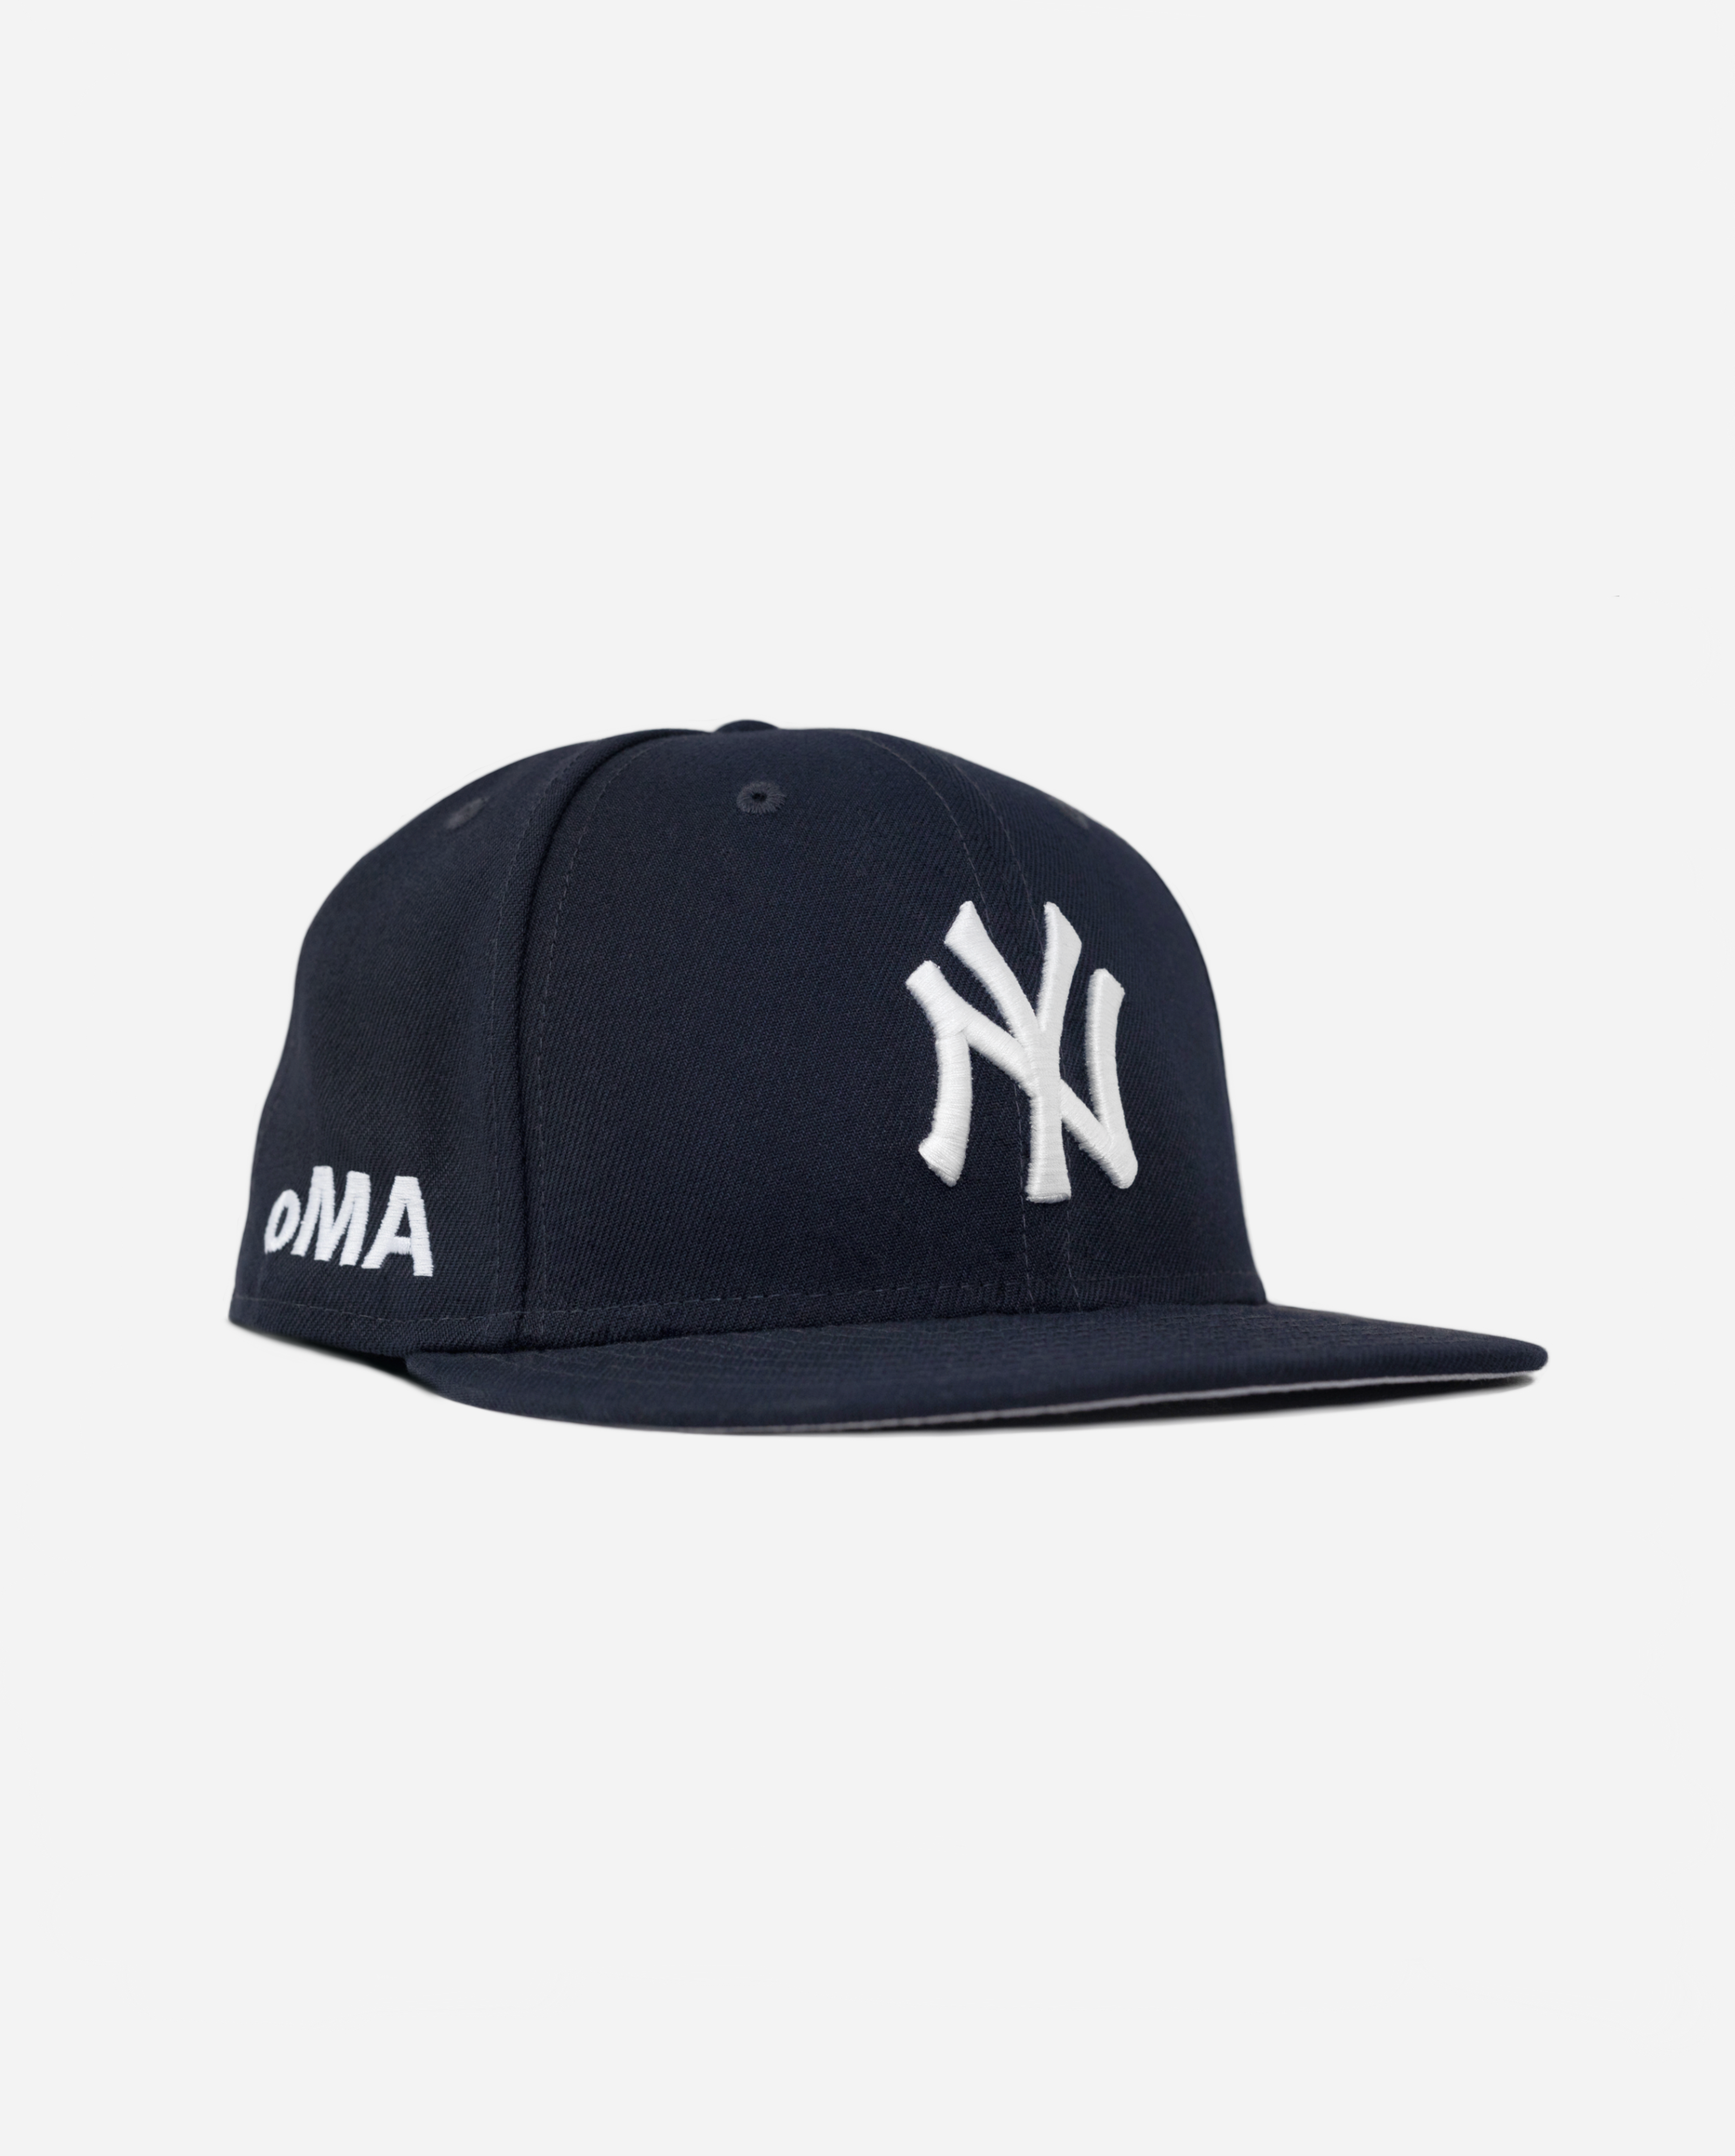 oMA NAVY NEW YORK YANKEES FITTED HAT (SAMPLE)